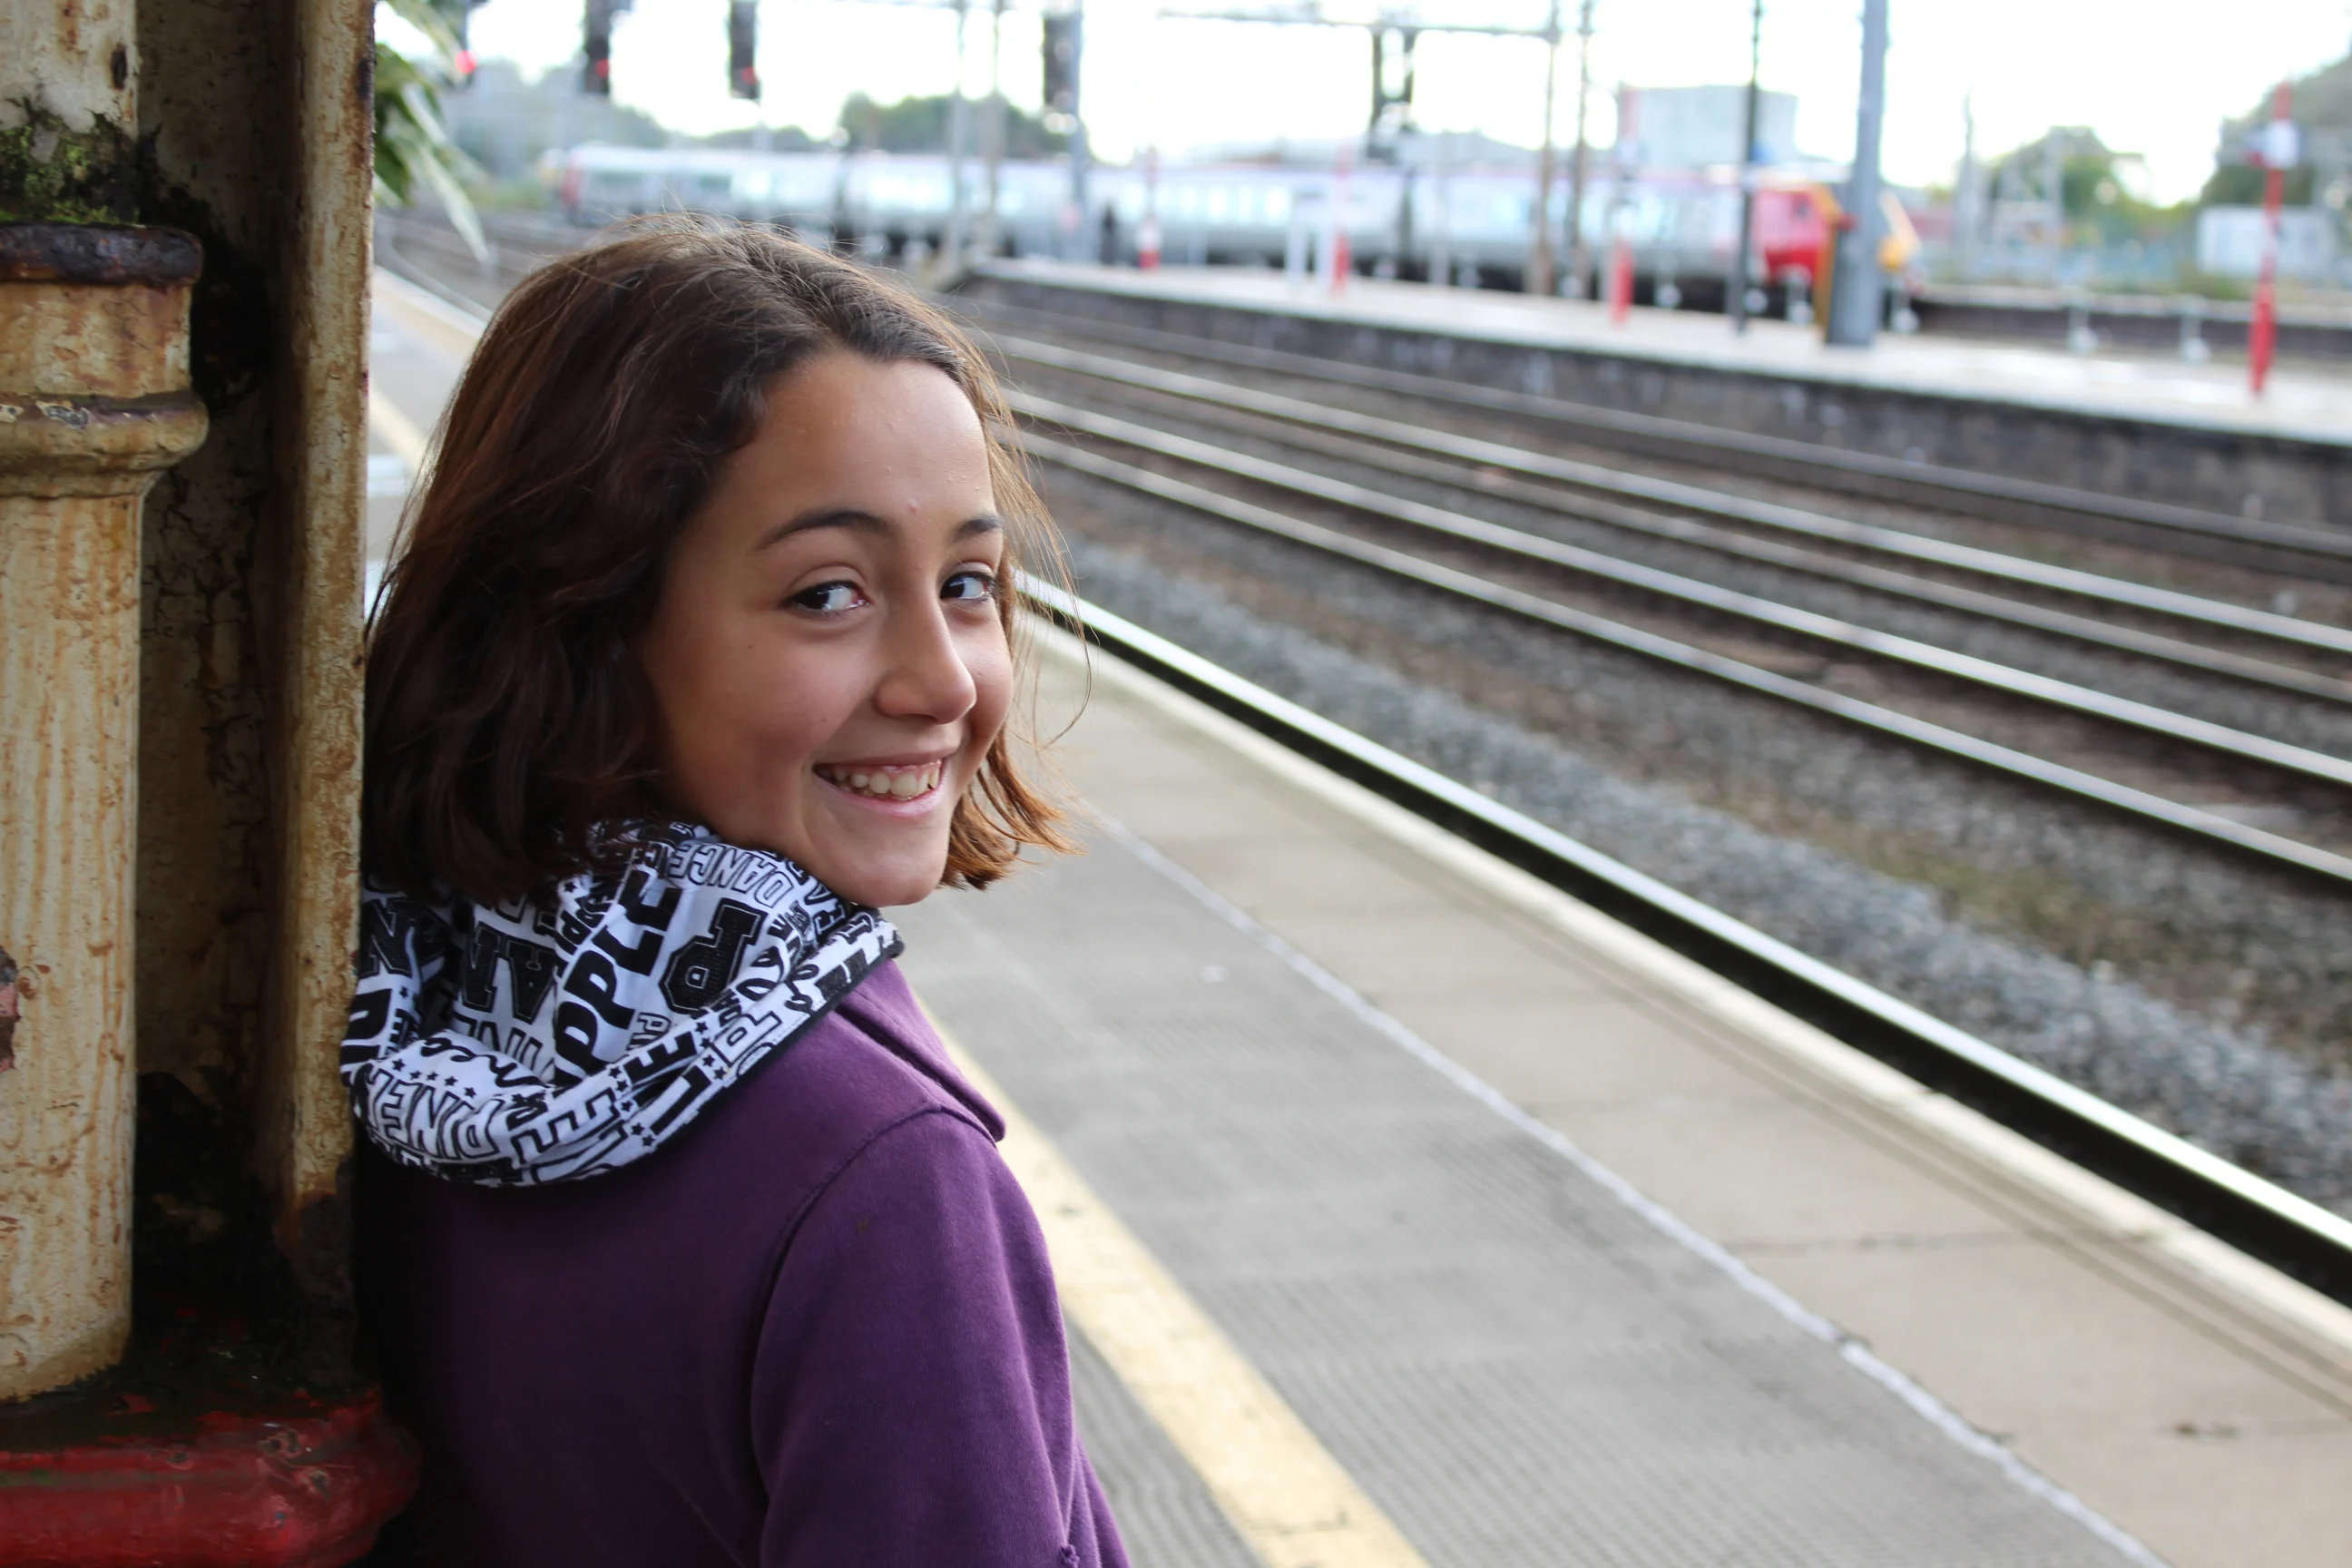 A girl in a purple top and with a black and white hood stands on a railway platform, smiling at the camera. 